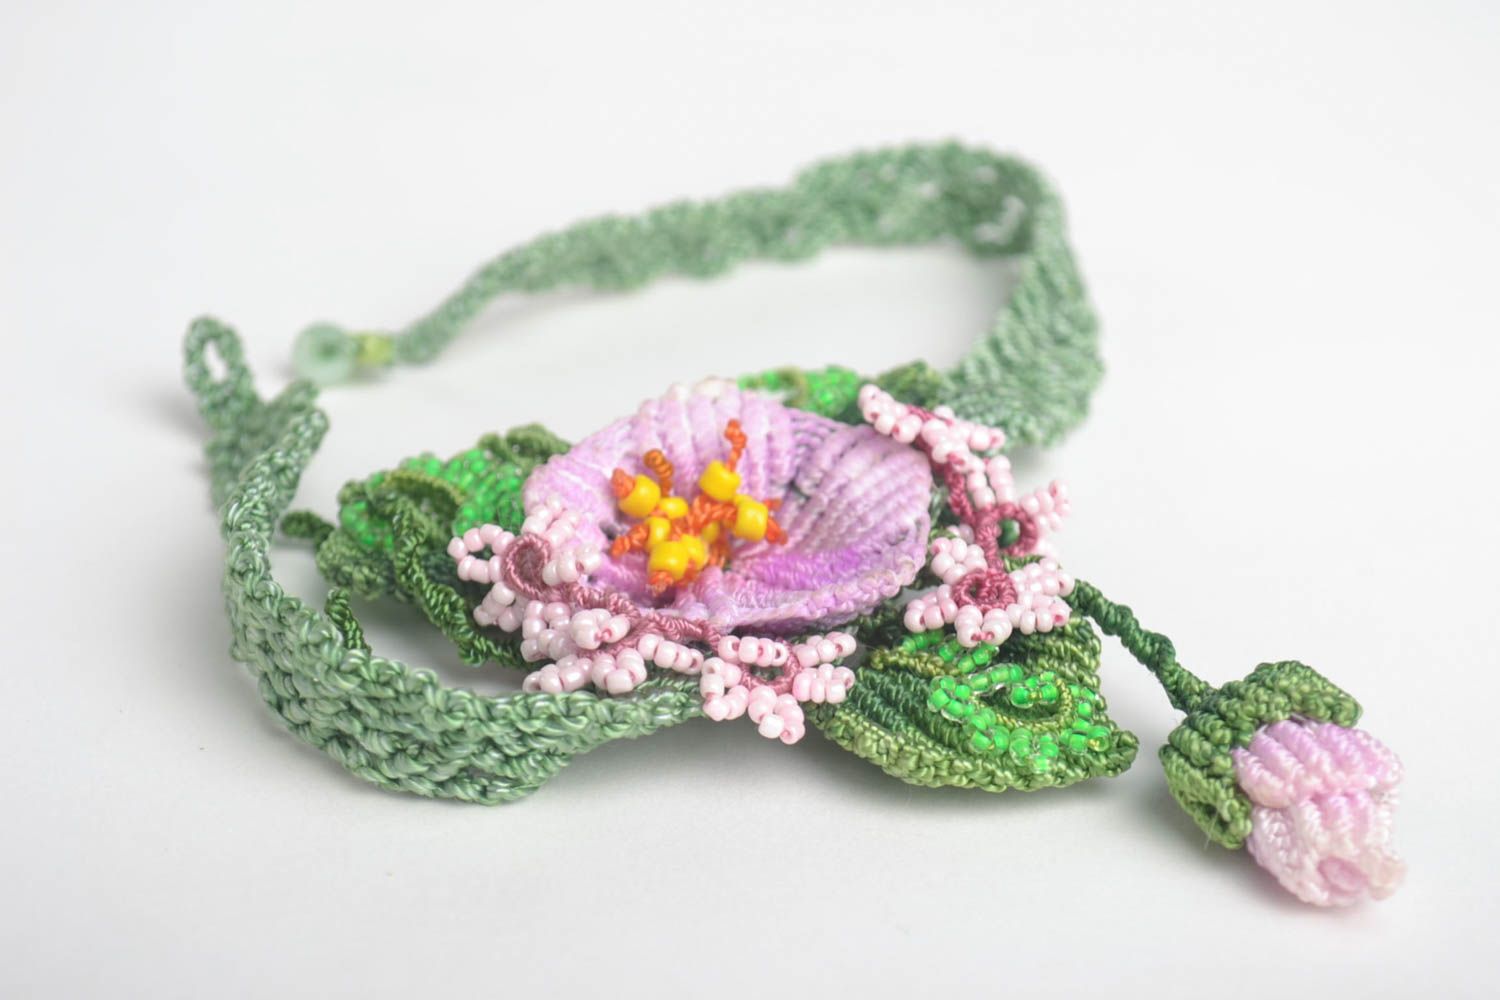 Flower jewelry handmade necklace macrame necklace fashion accessories gift ideas photo 4